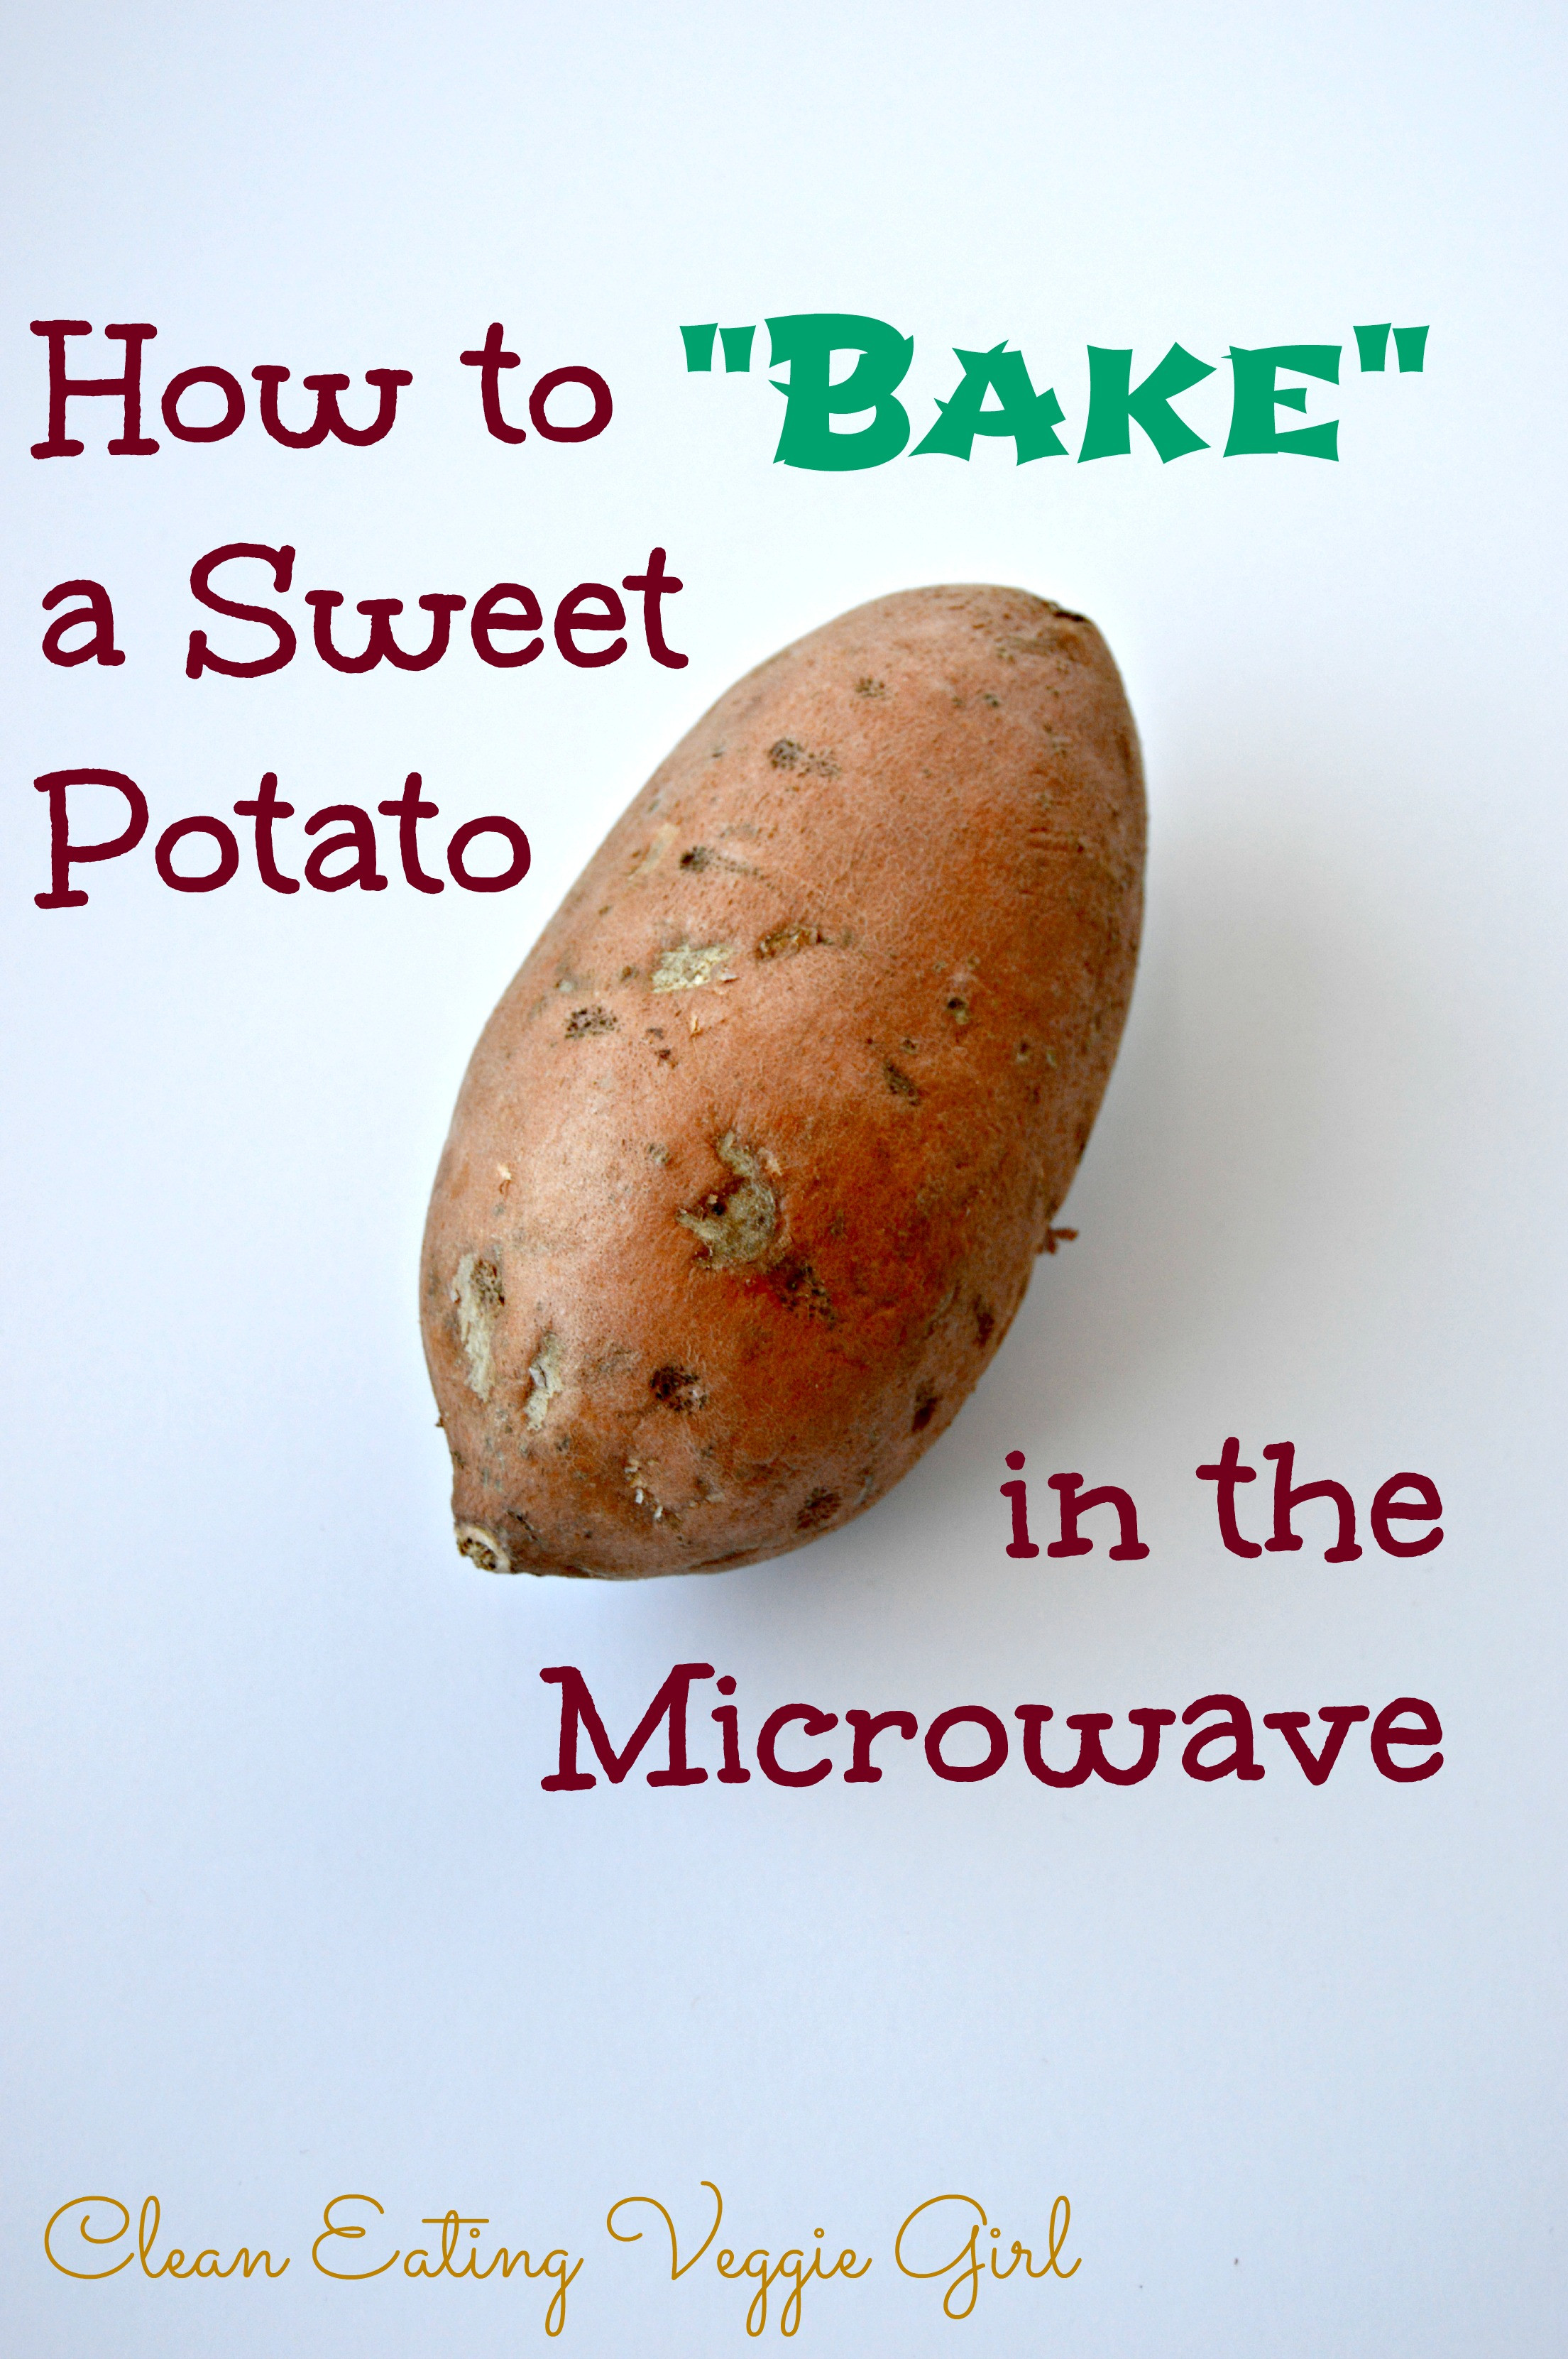 How To Bake A Sweet Potato
 How to Make a Baked Sweet Potato in the Microwave Clean